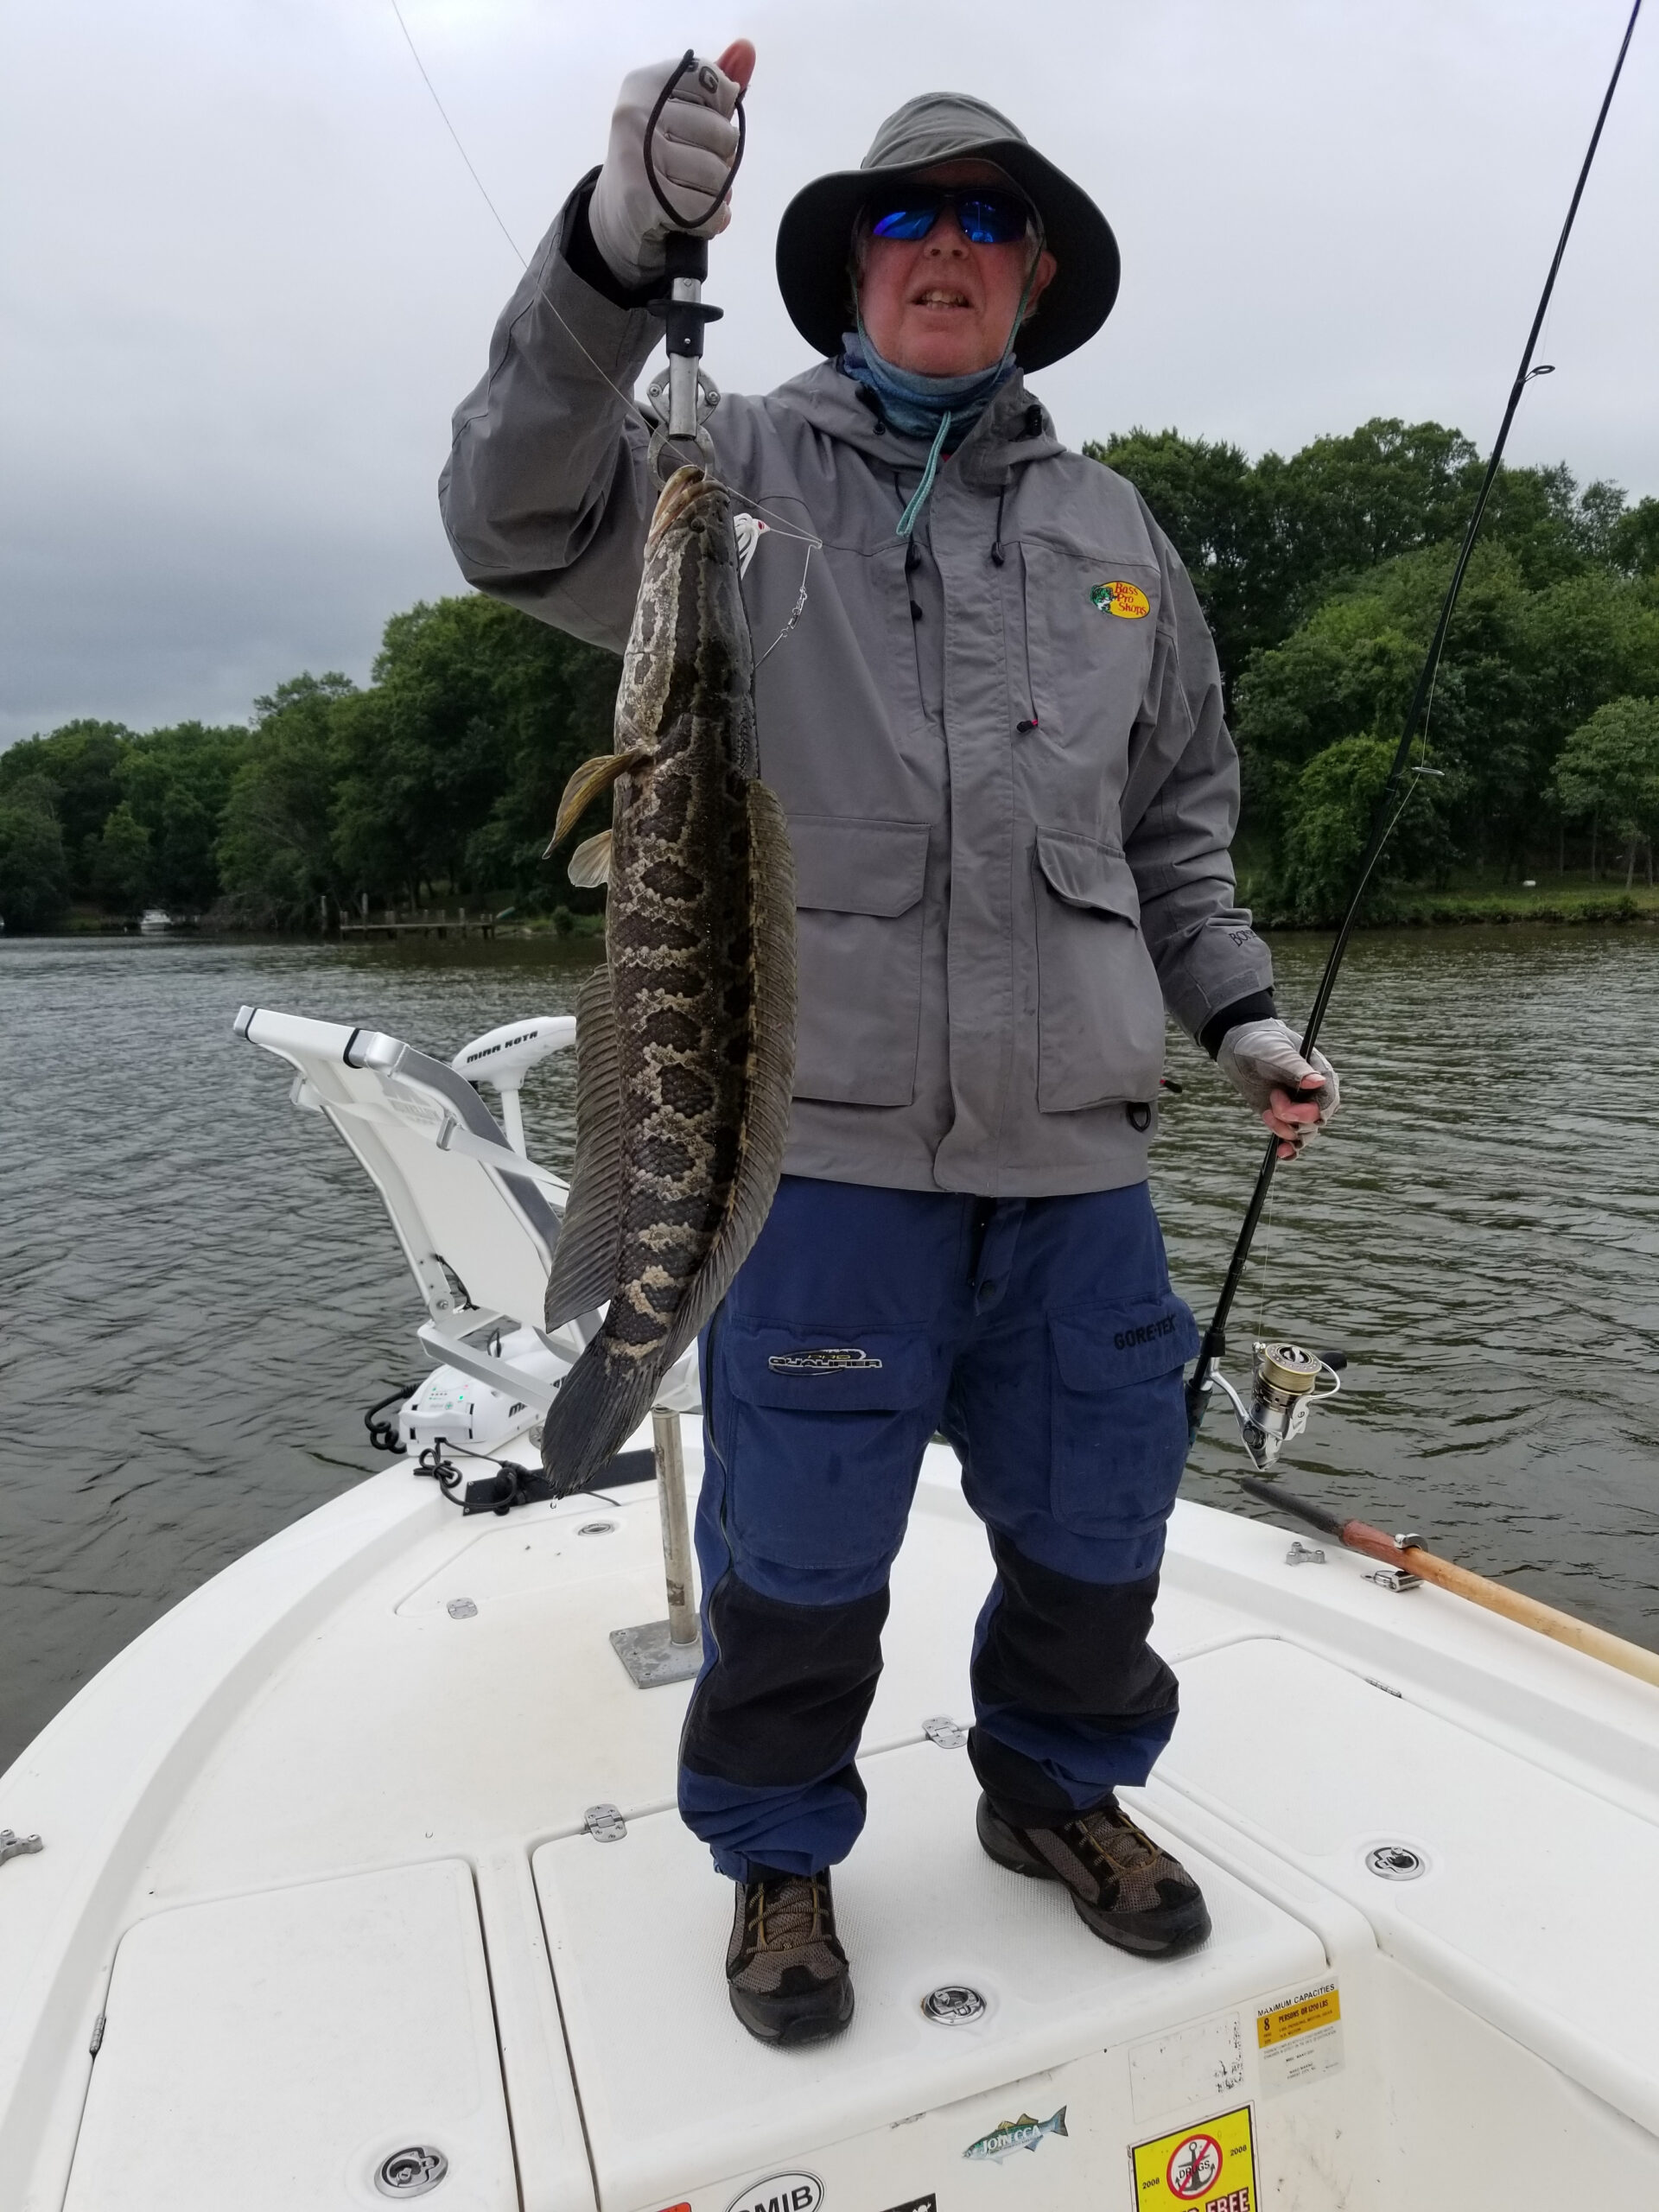 https://indianheadcharters.com/wp-content/uploads/2020/06/6-17-20-2-scaled.jpg